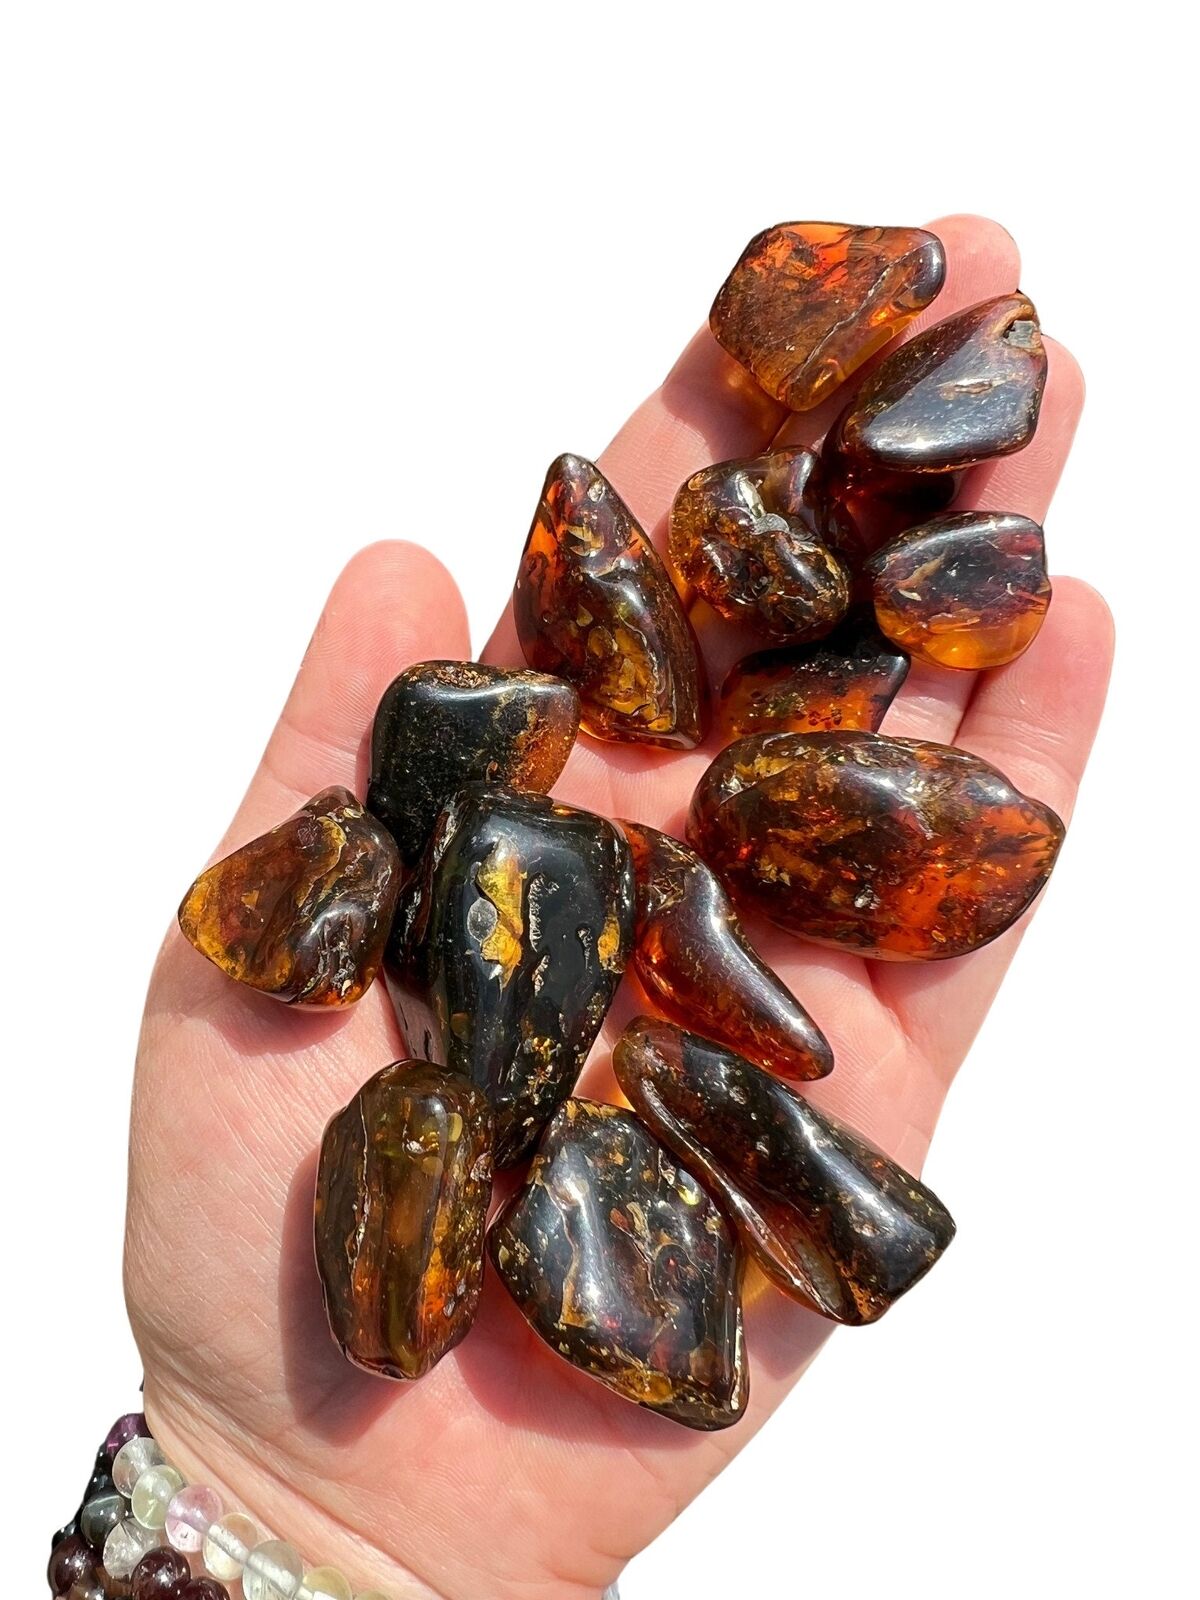 Baltic Amber Tumbled Stone, Dark Natural Baltic Amber from Indonesia